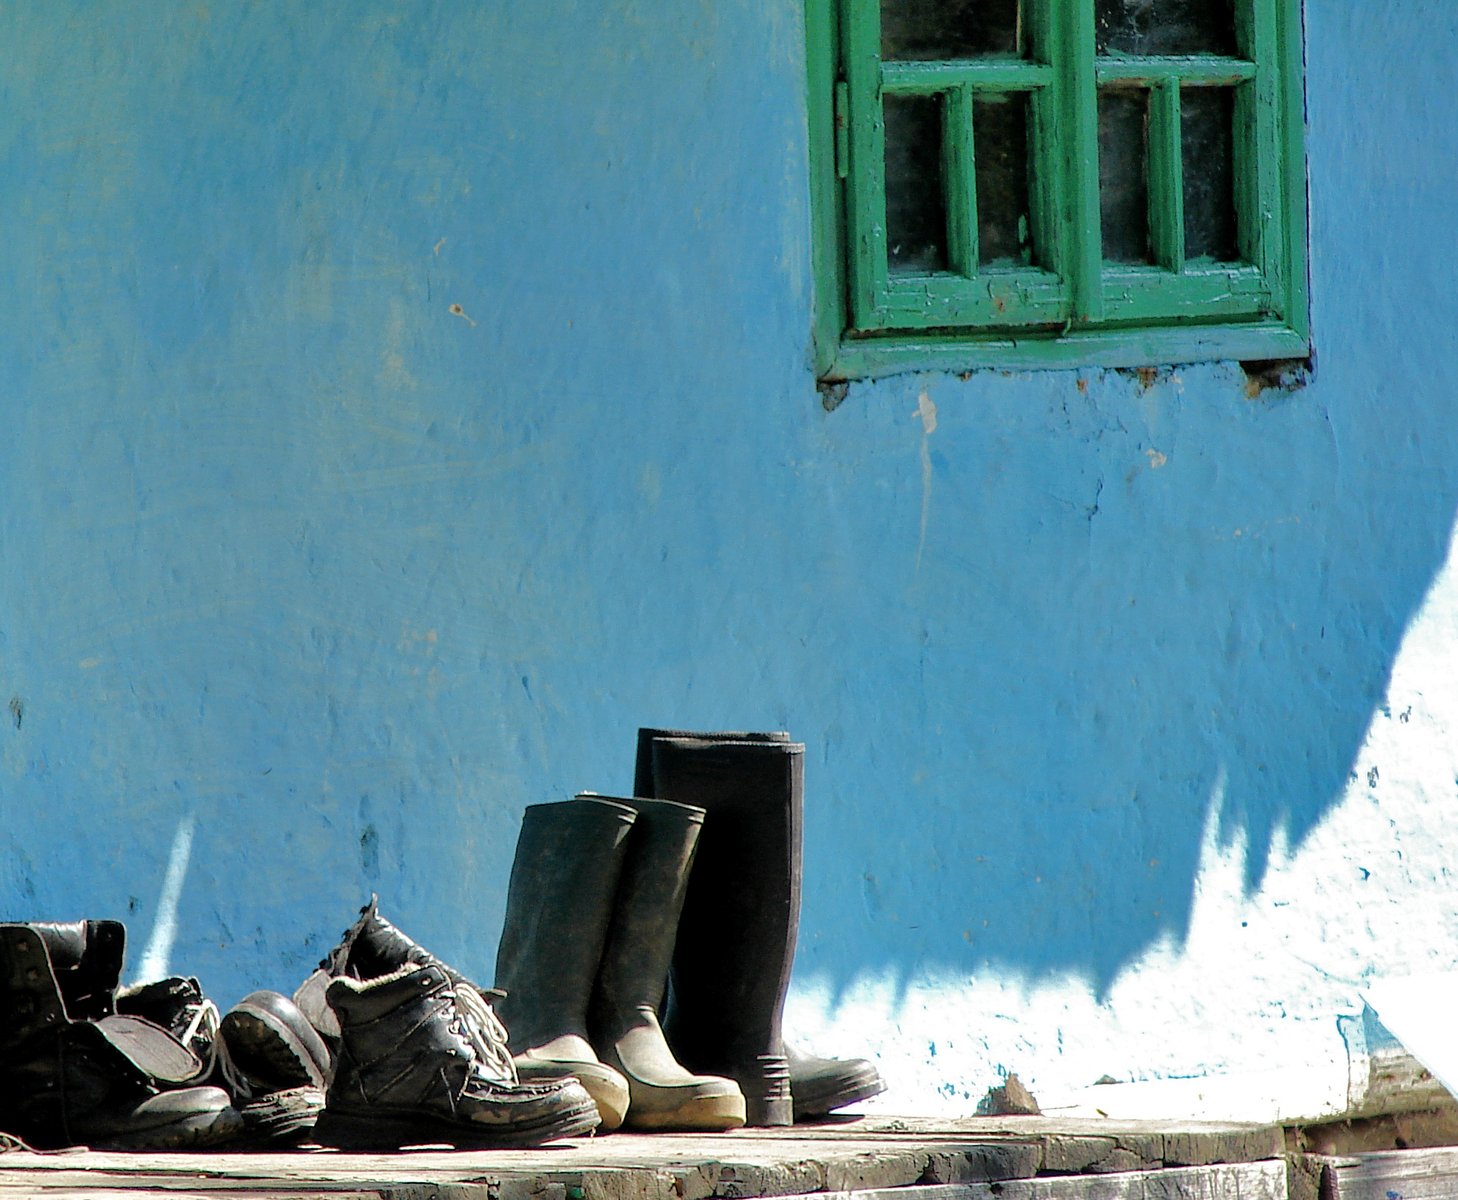 shoes stacked up against a blue wall near a window